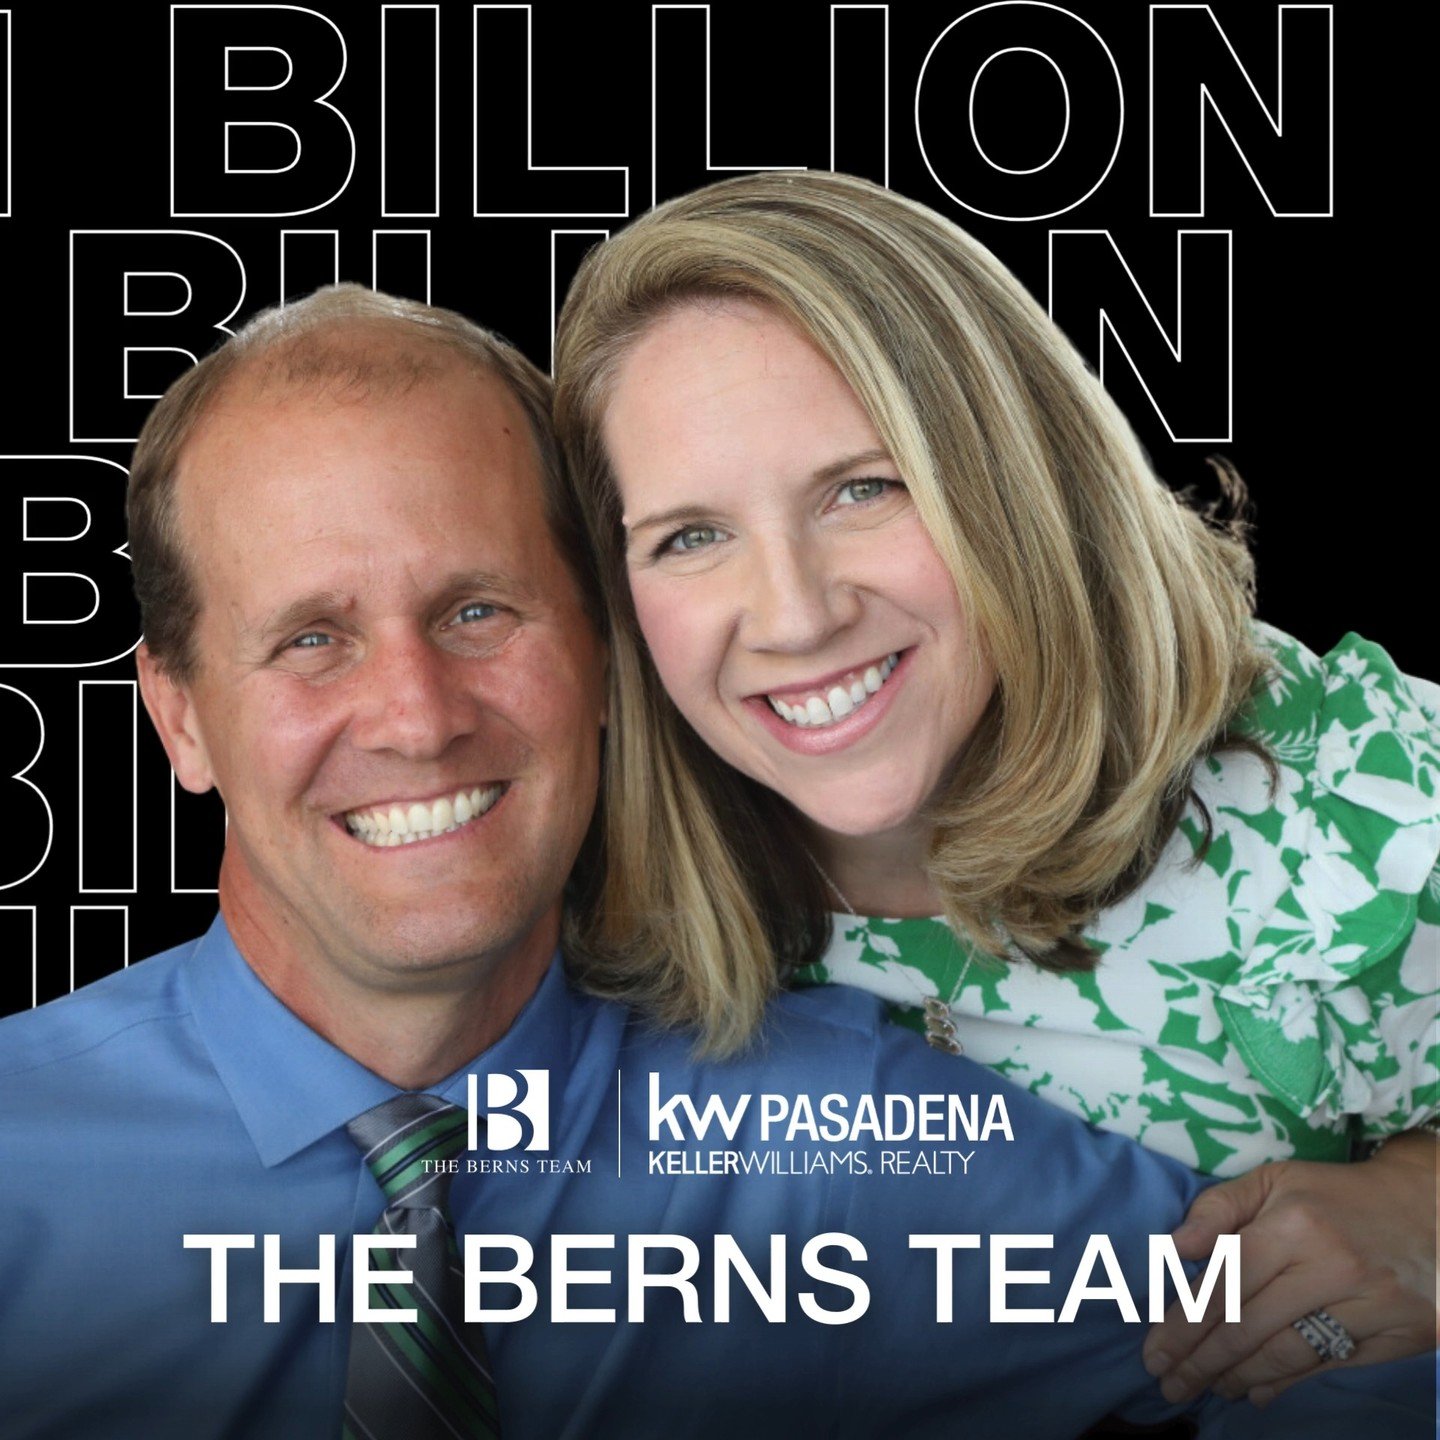 We are thrilled to celebrate an incredible milestone achieved by Keller Williams Pasadena's very own, the Berns Team!!! Laura and Jason Berns, your leadership and dedication have steered your team to remarkable heights! Culminating in the Awe-Inspiri